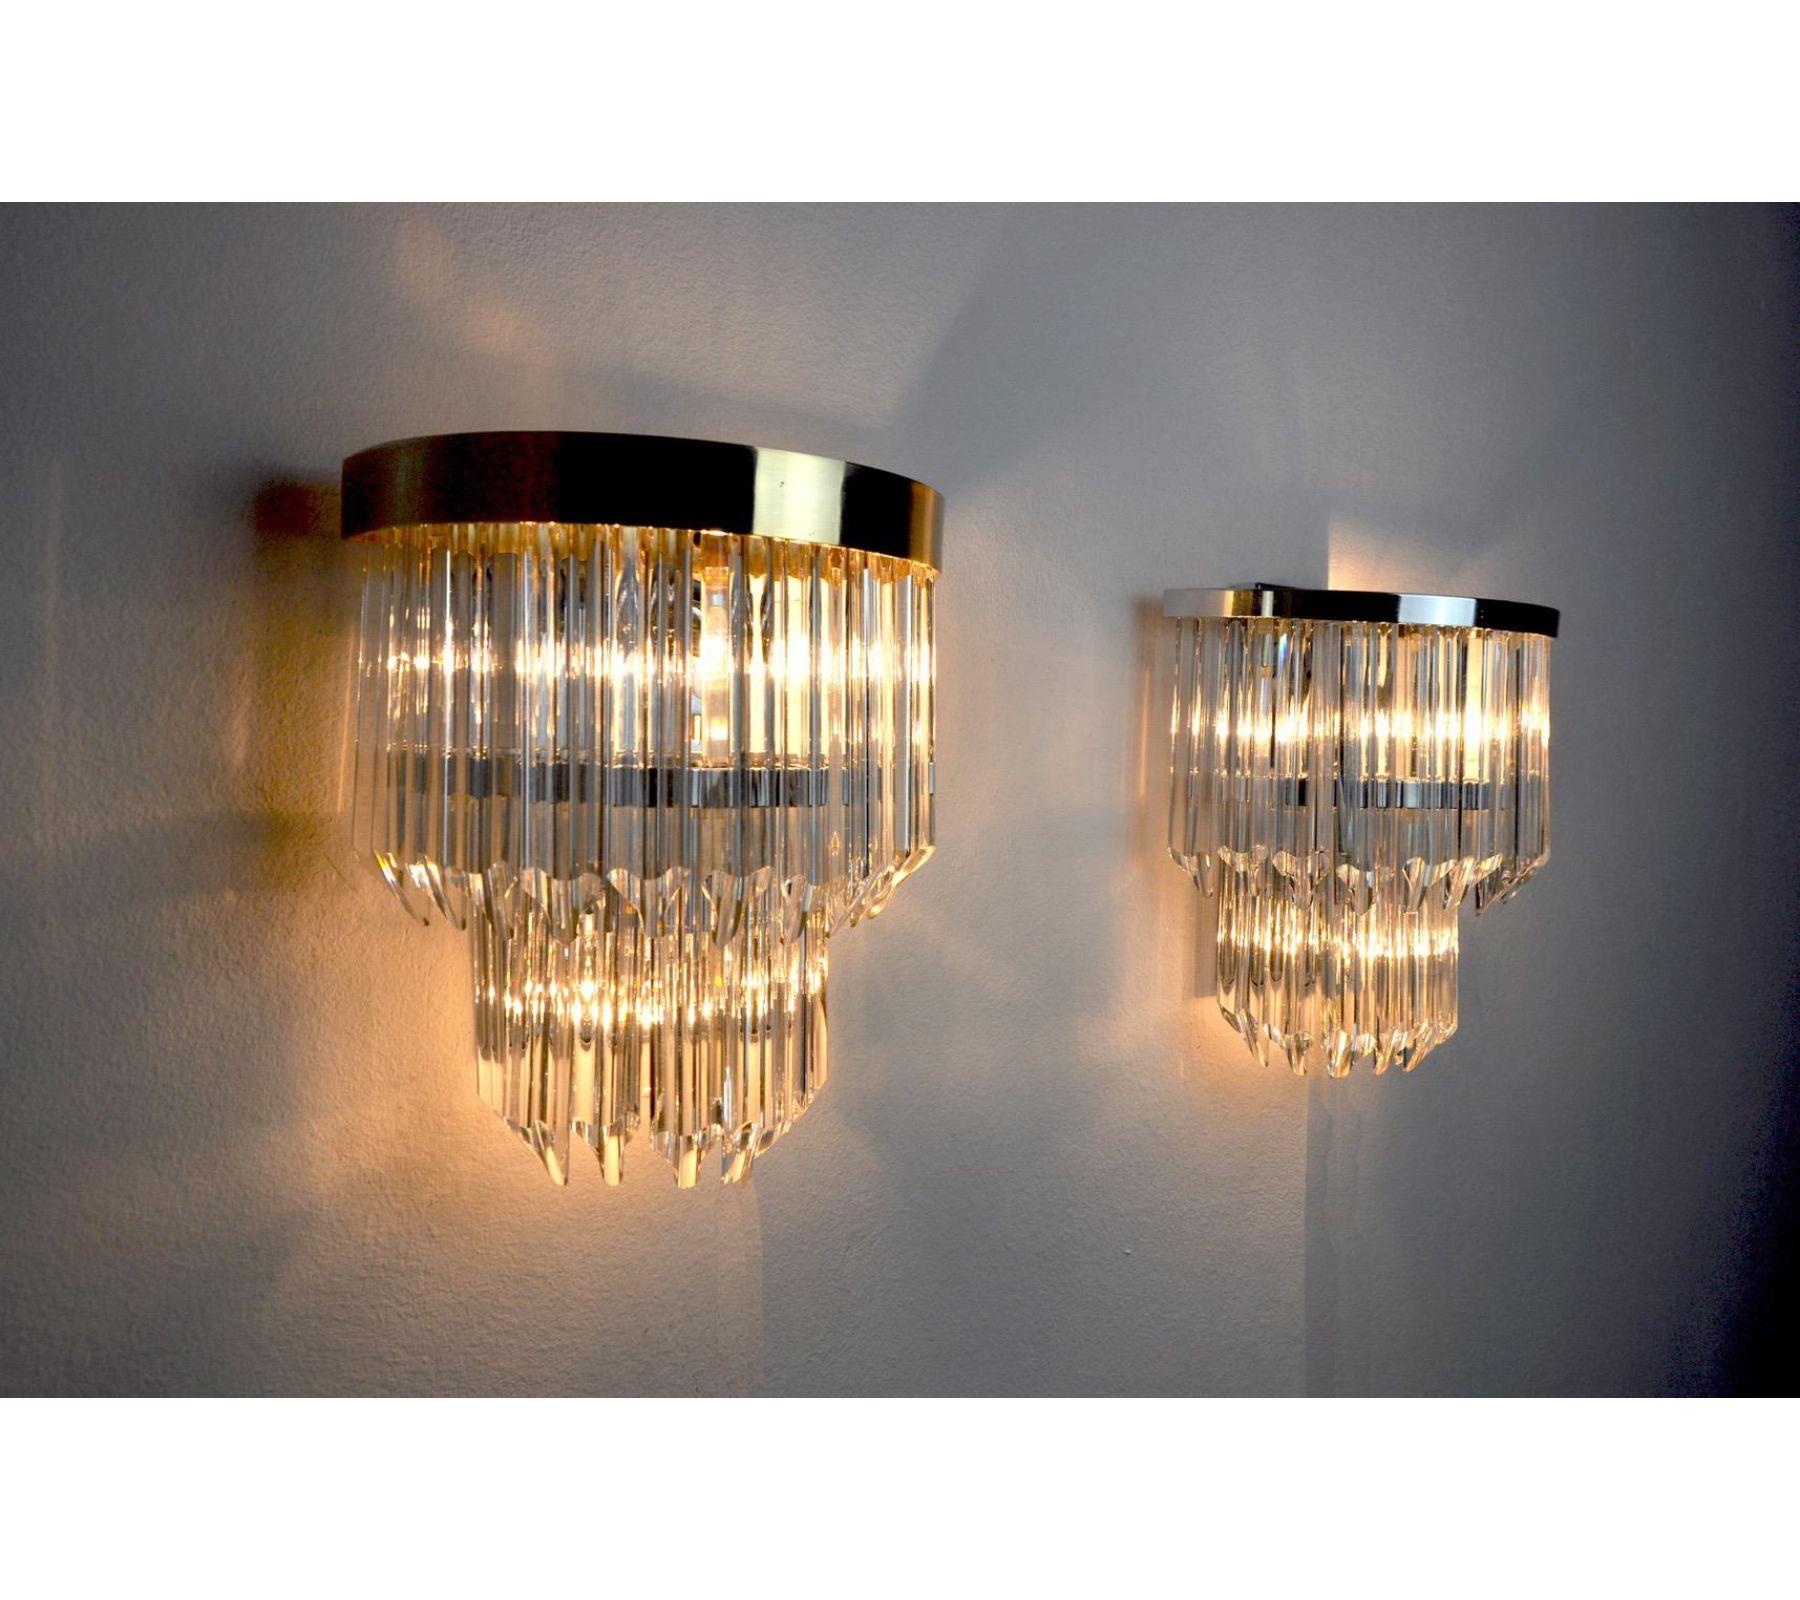 Late 20th Century 1970s Paolo Venini Chrome and Glass Sconces, Italy, a Pair For Sale